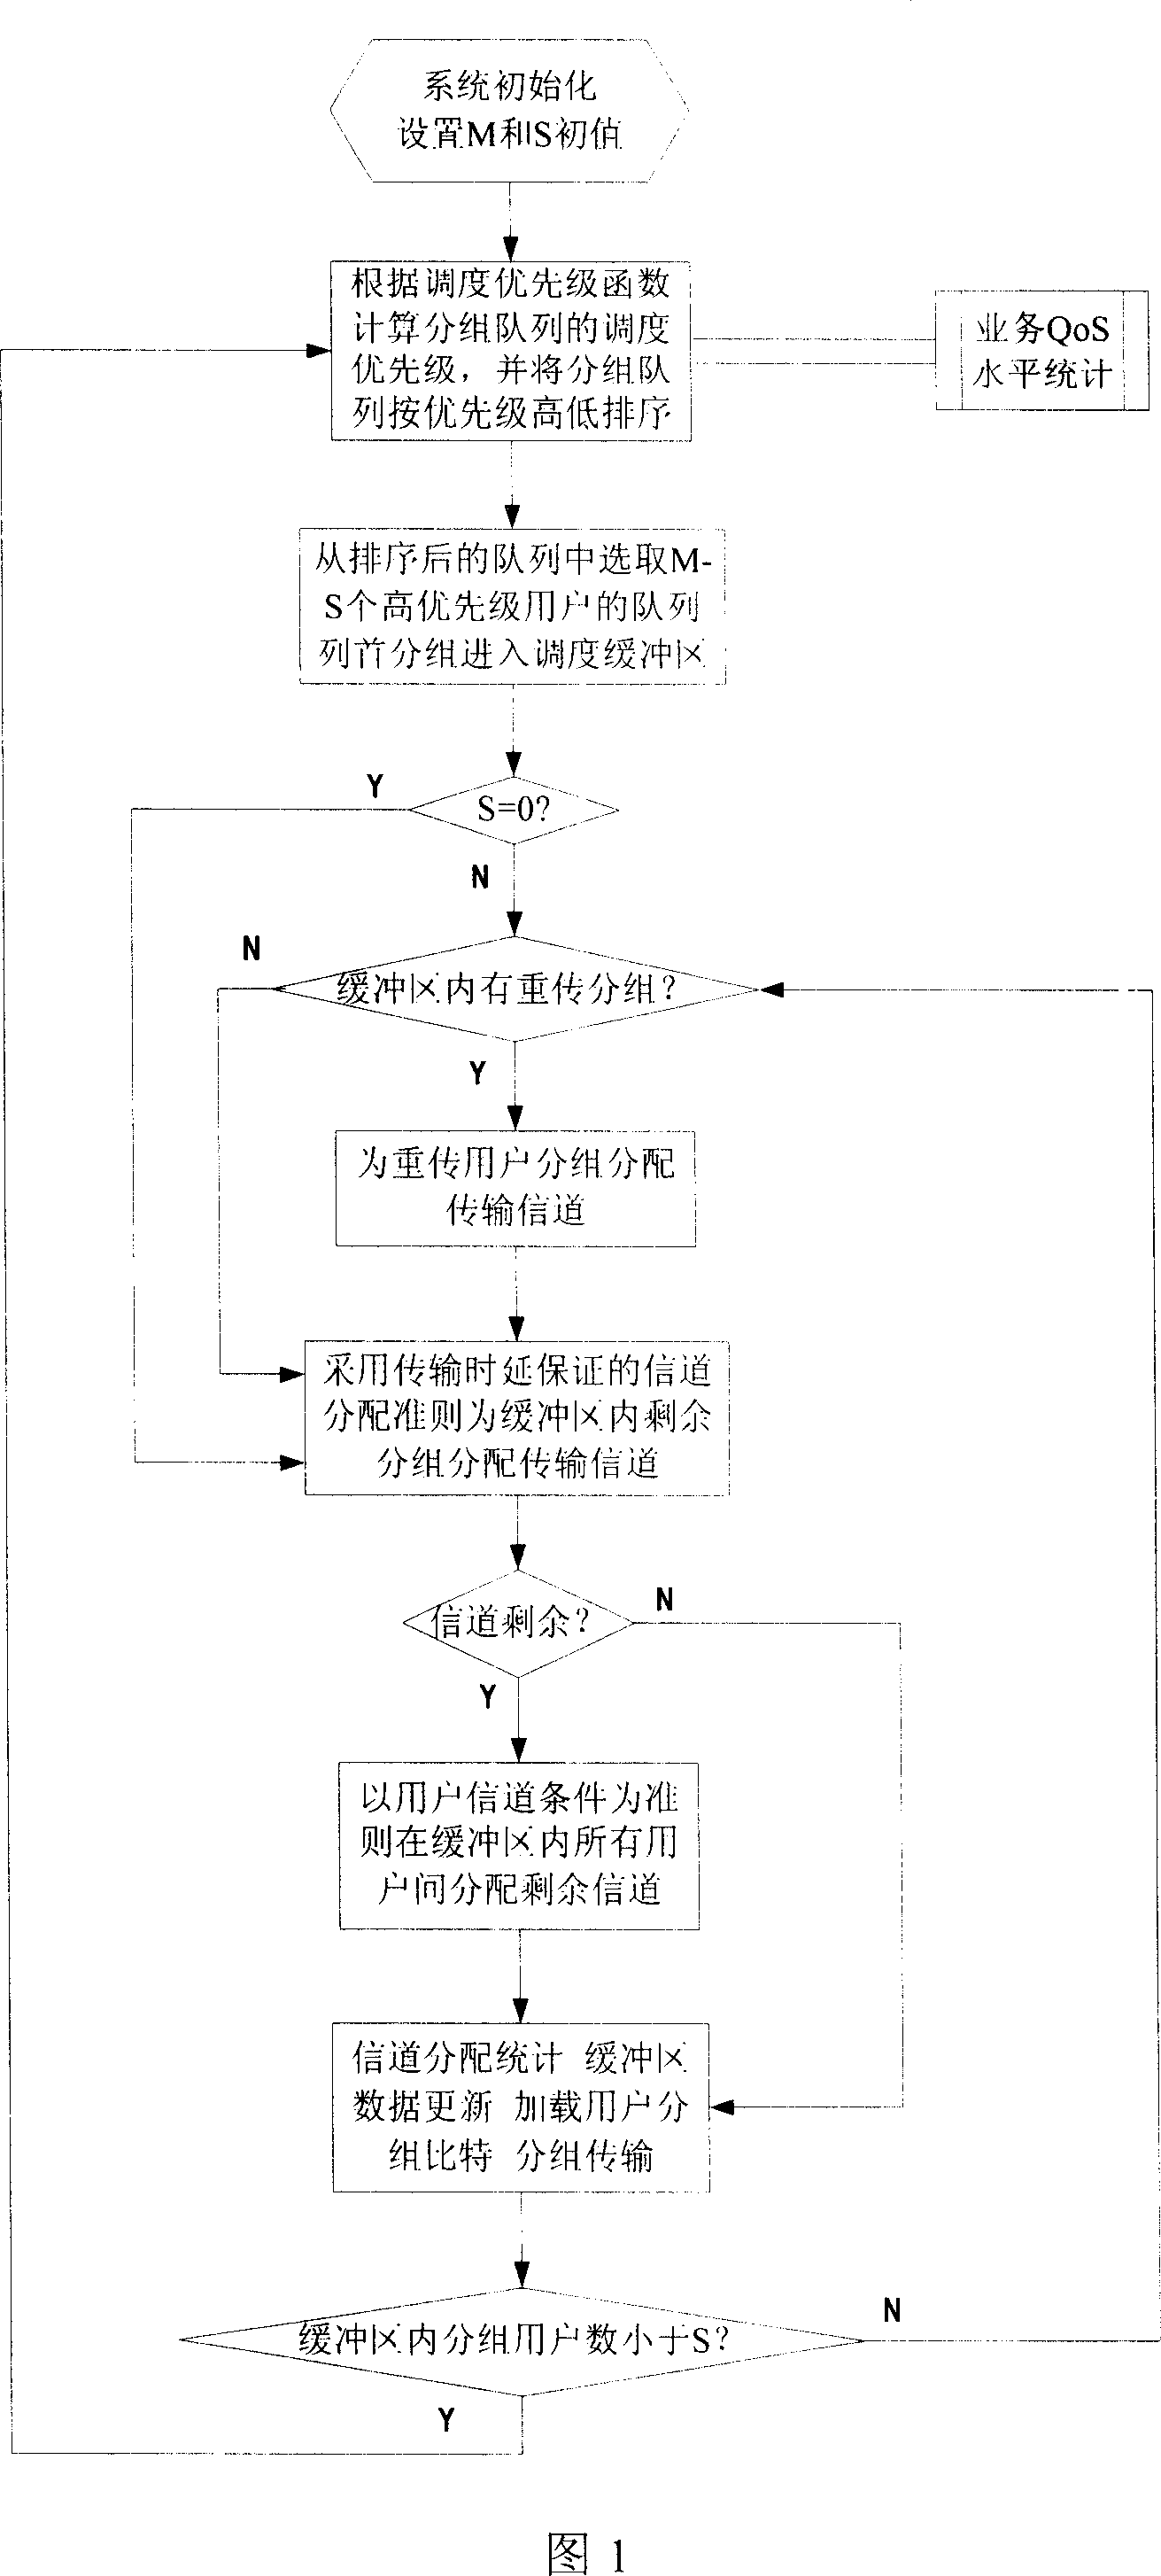 Group dispatching and channel distributing method for HSDPA system